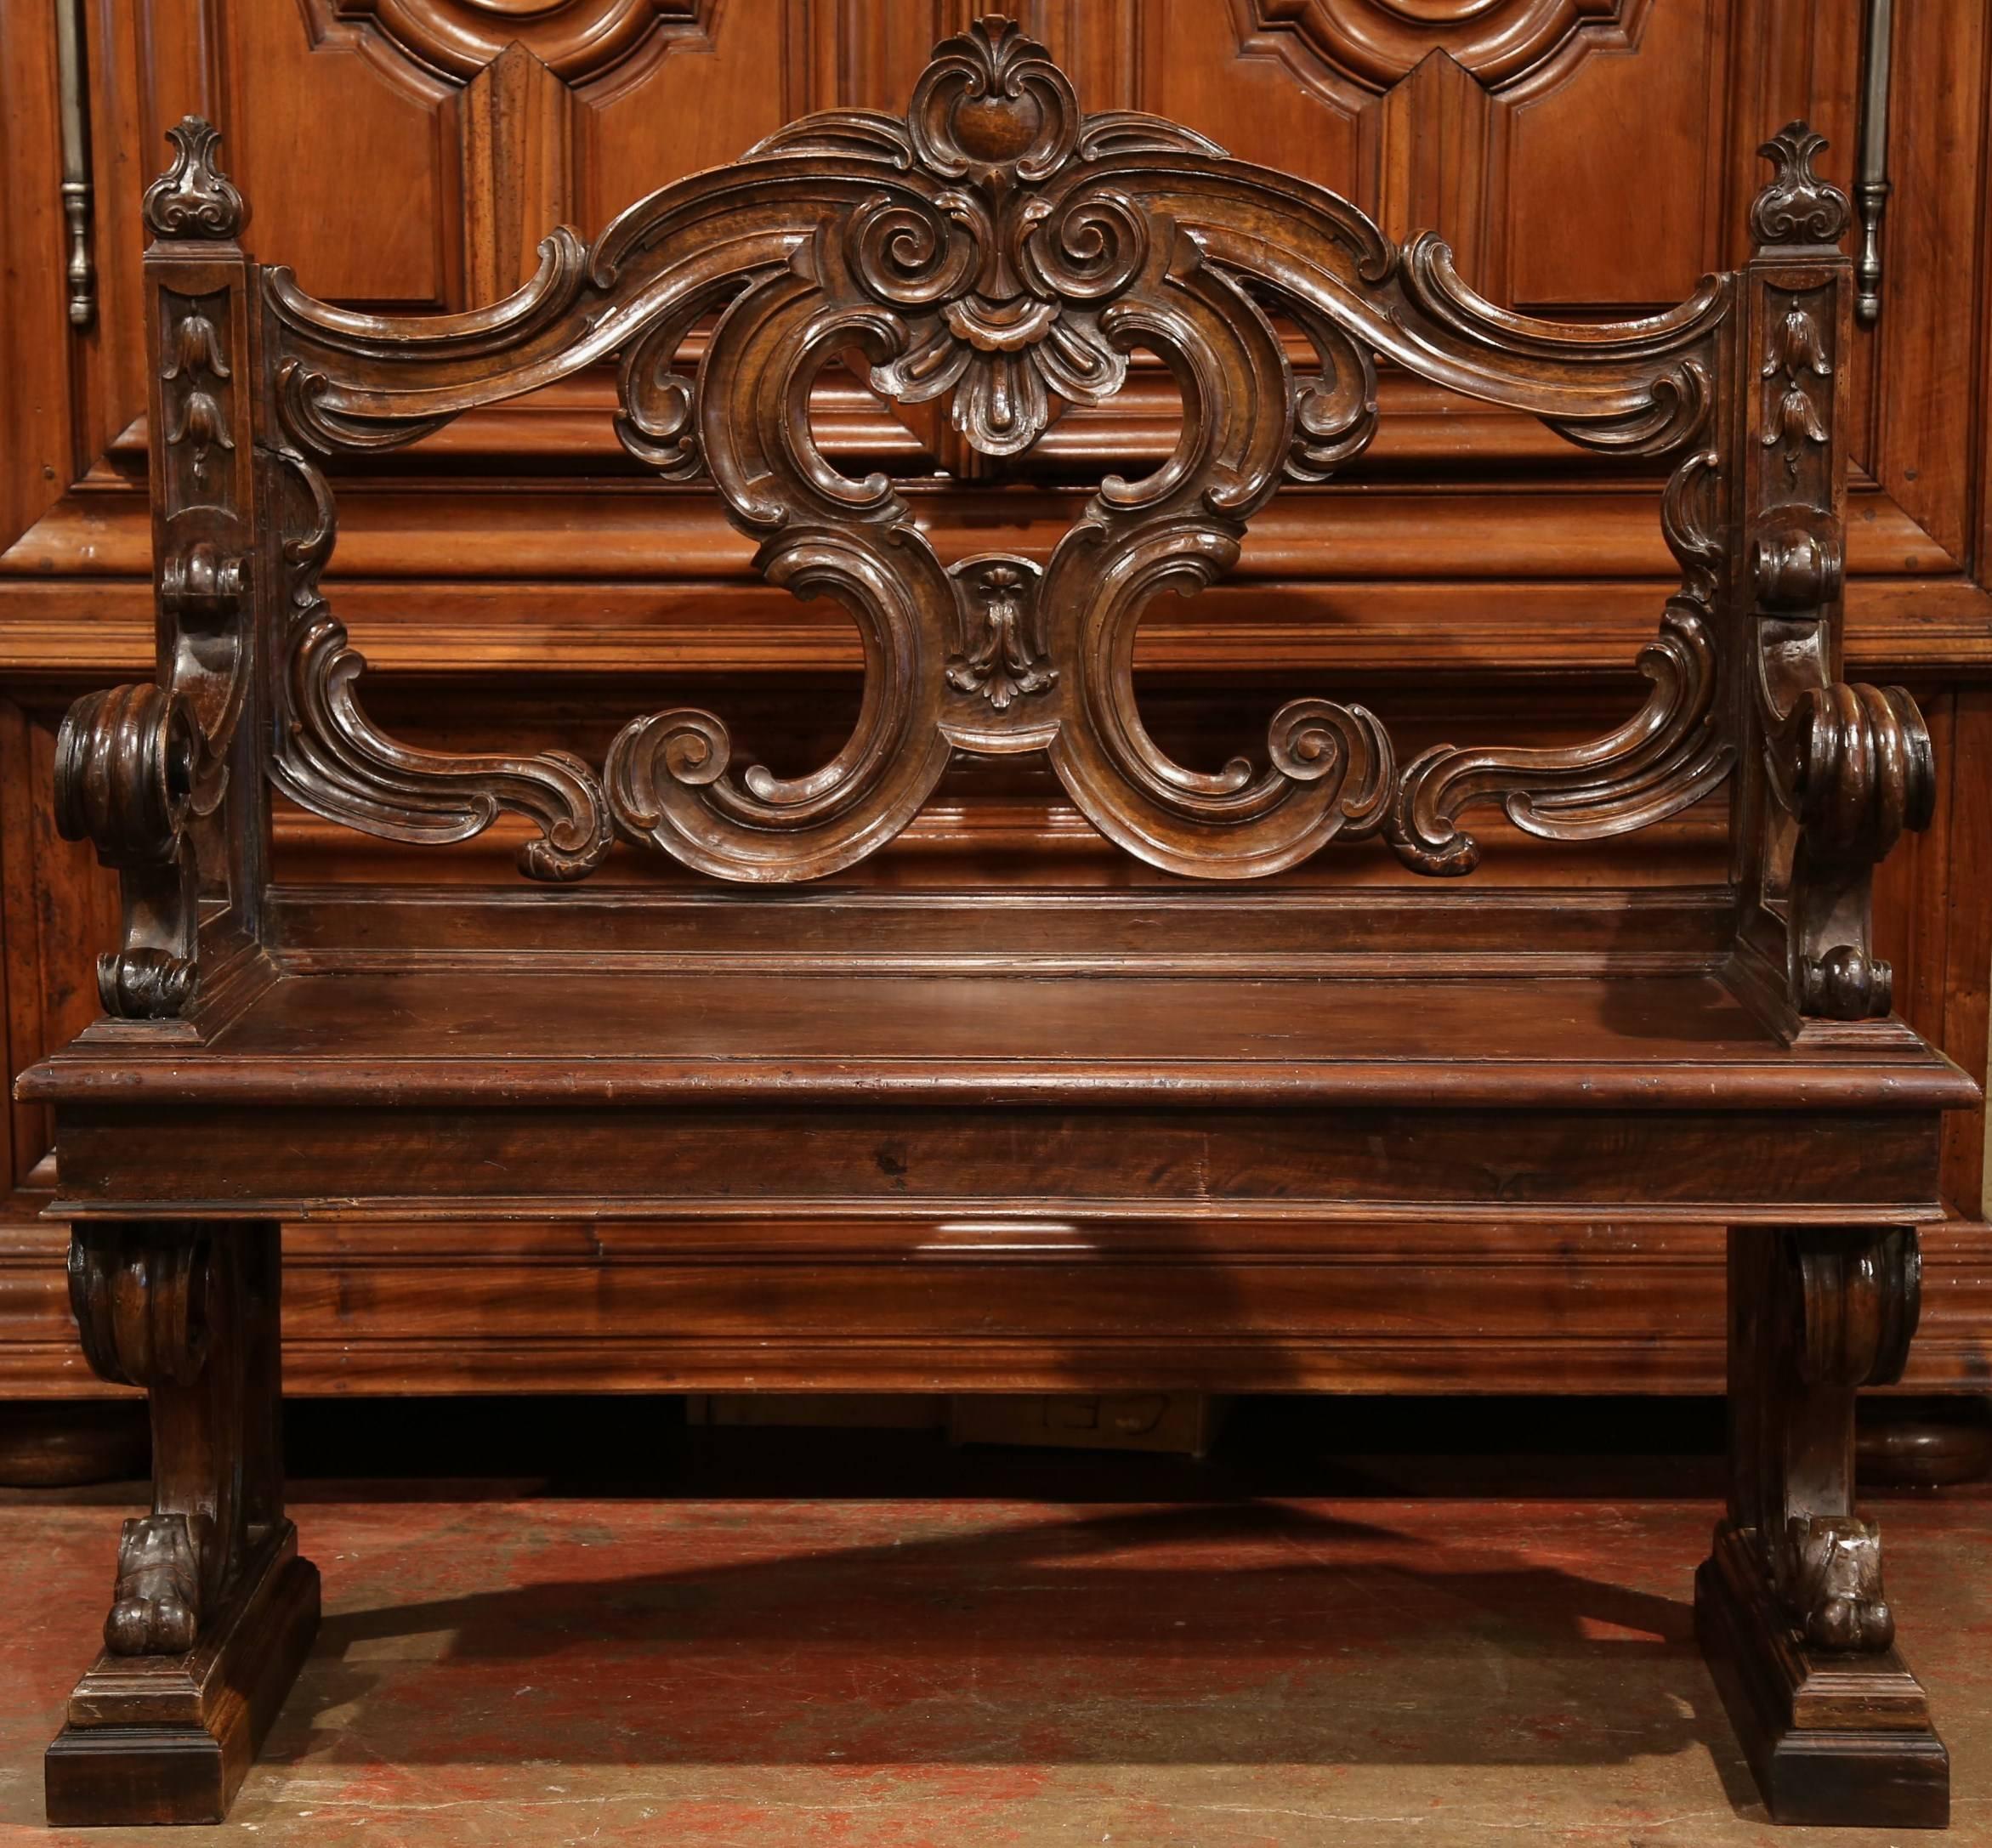 For a decorative, beautiful seating option, consider this elegant antique bench from Italy. Made circa 1810, this hand-carved fruitwood bench would make a perfect addition to an entryway, or placed in front of a window, or at the foot of a bed. This